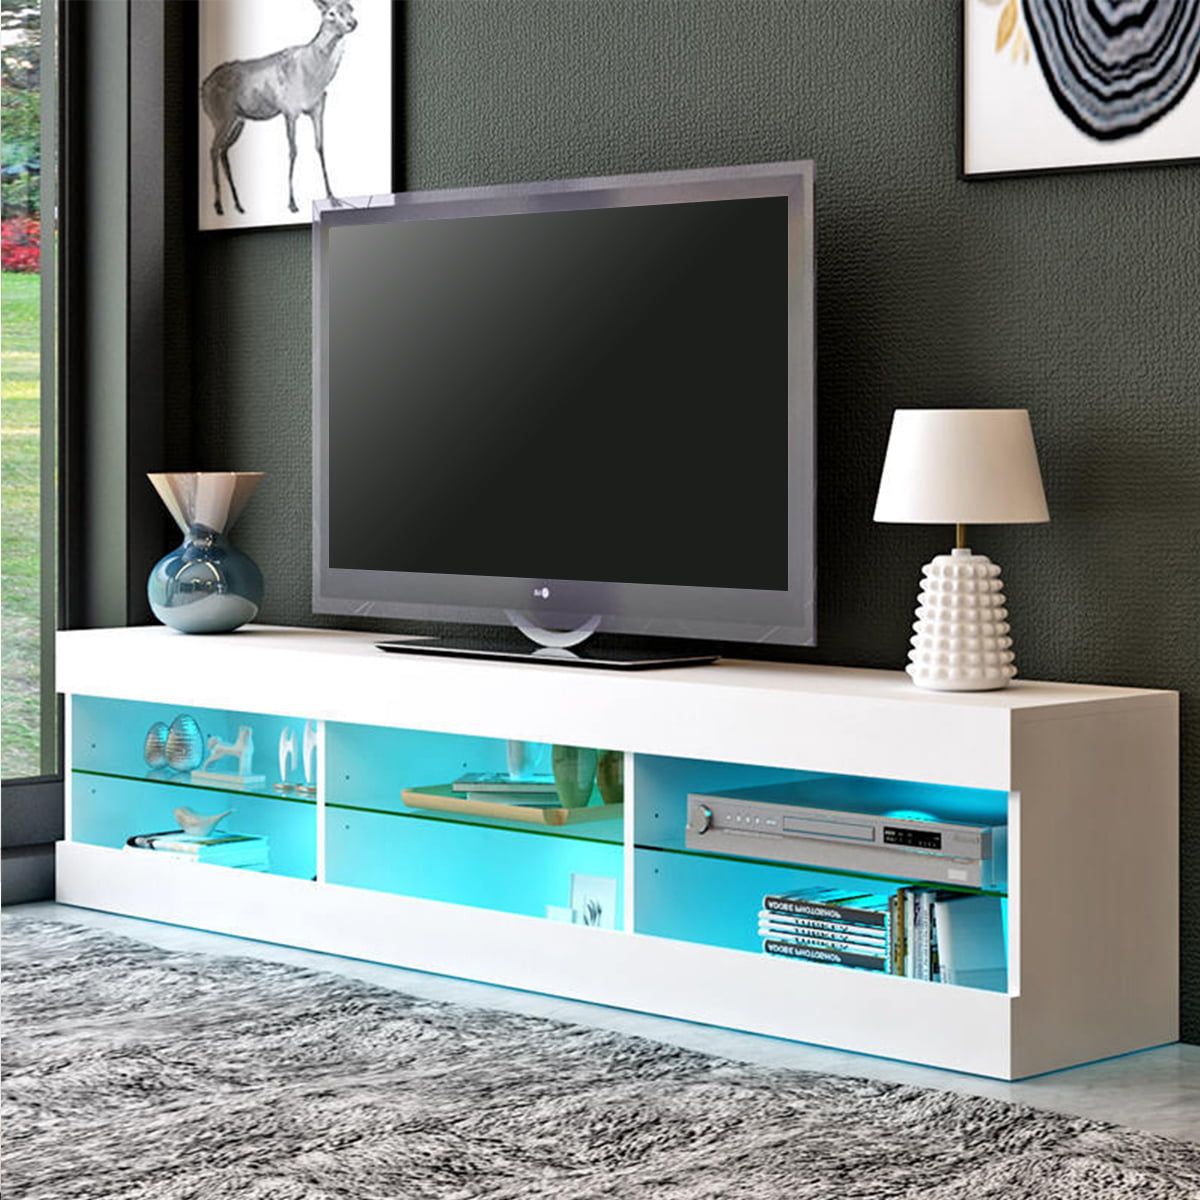 57'' Tv Stand With Rgb Led Lights, Modern Decorative Tv Console Storage Throughout Rgb Tv Entertainment Centers (View 4 of 20)